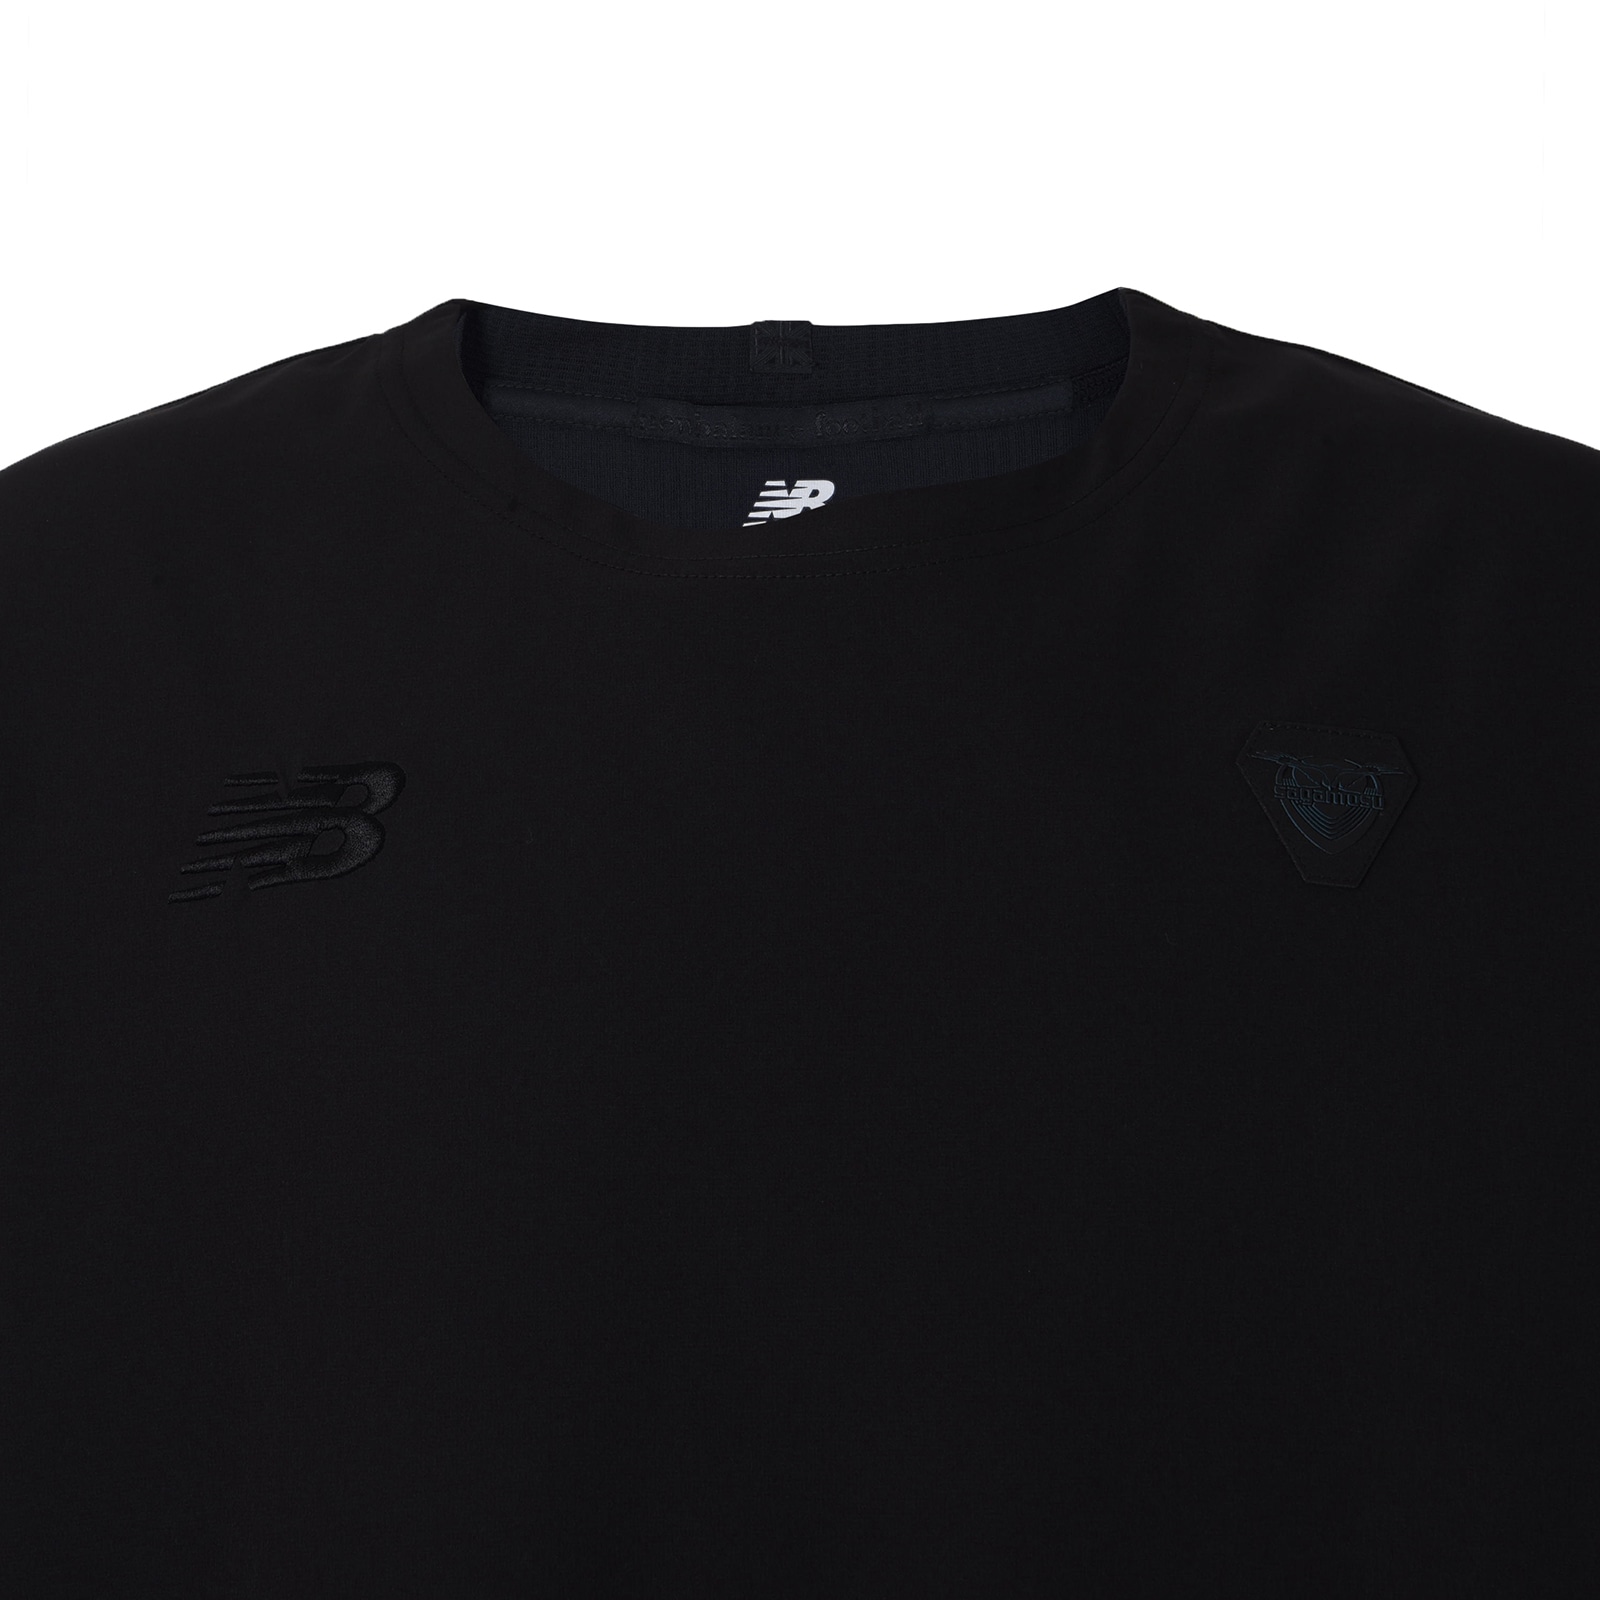 Black Out Collection Sagan Tosu Premier Collection Stretch Woven Top Long Sleeve